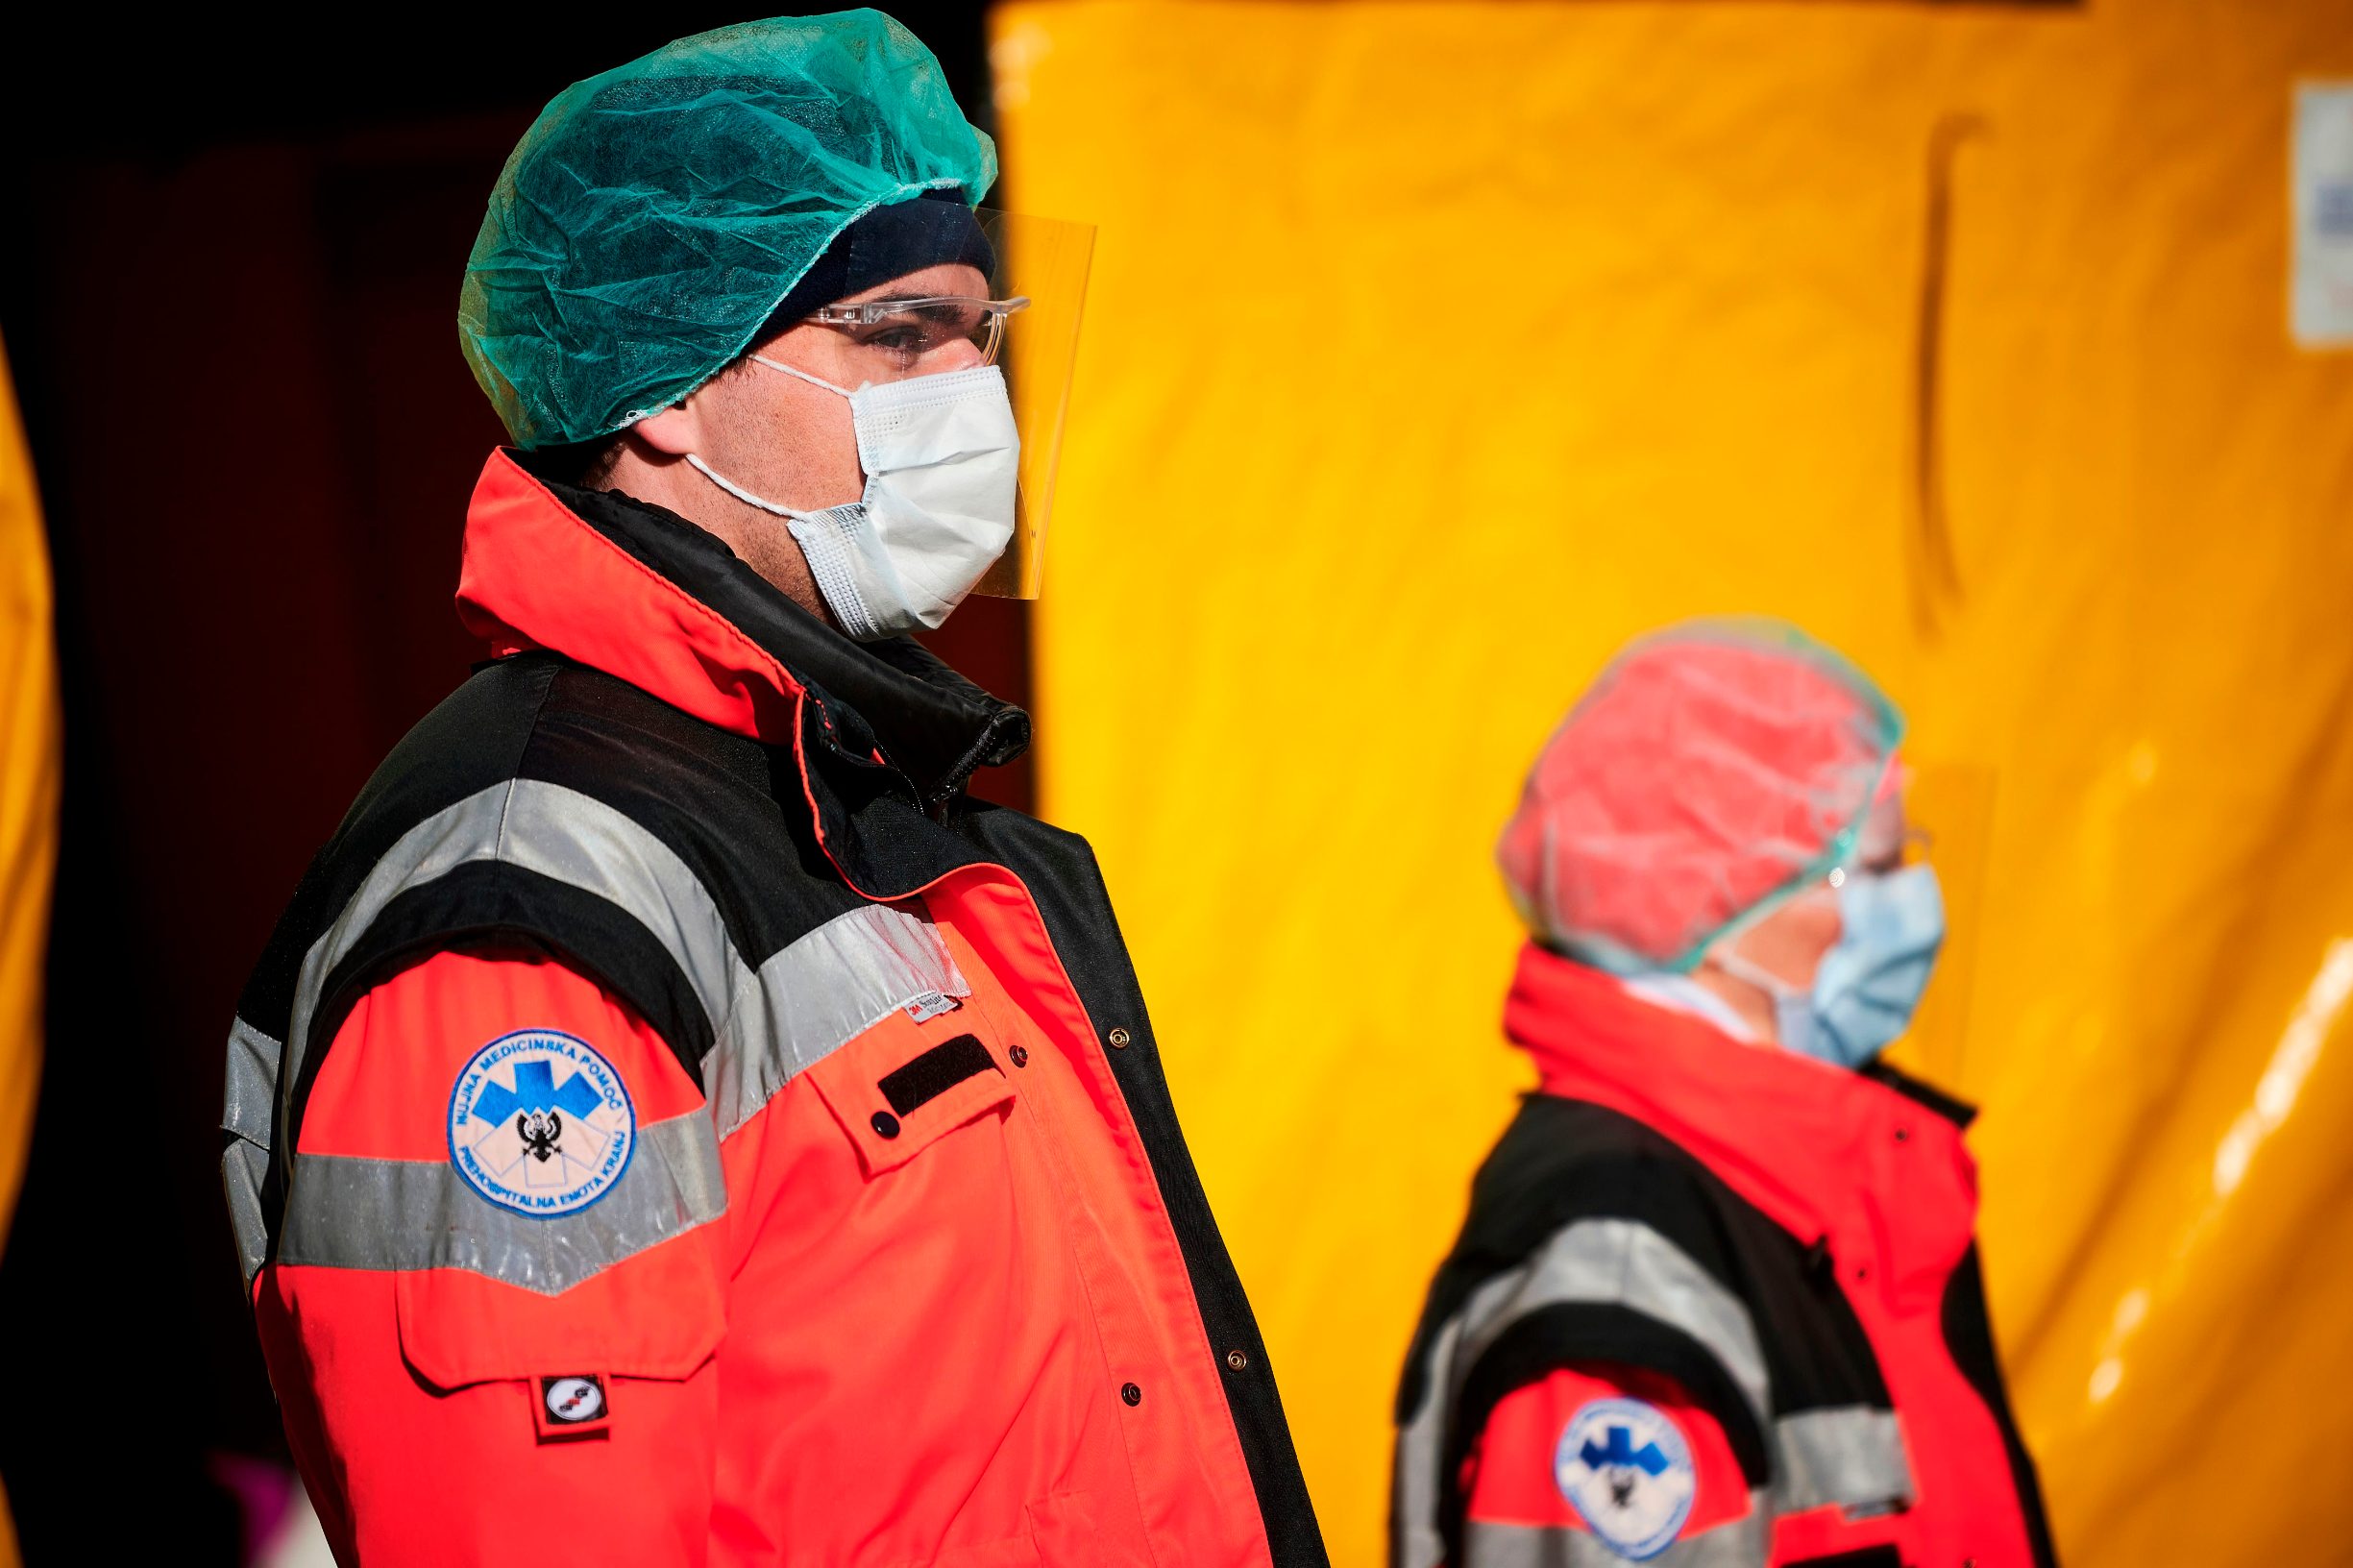 Medical workers stand in front of one of the entrances of the Community Health Centre in Kranj, Slovenia, on March 23, 2020 amid concerns over the spread of the COVID-19 coronavirus. (Photo by Jure Makovec / AFP)